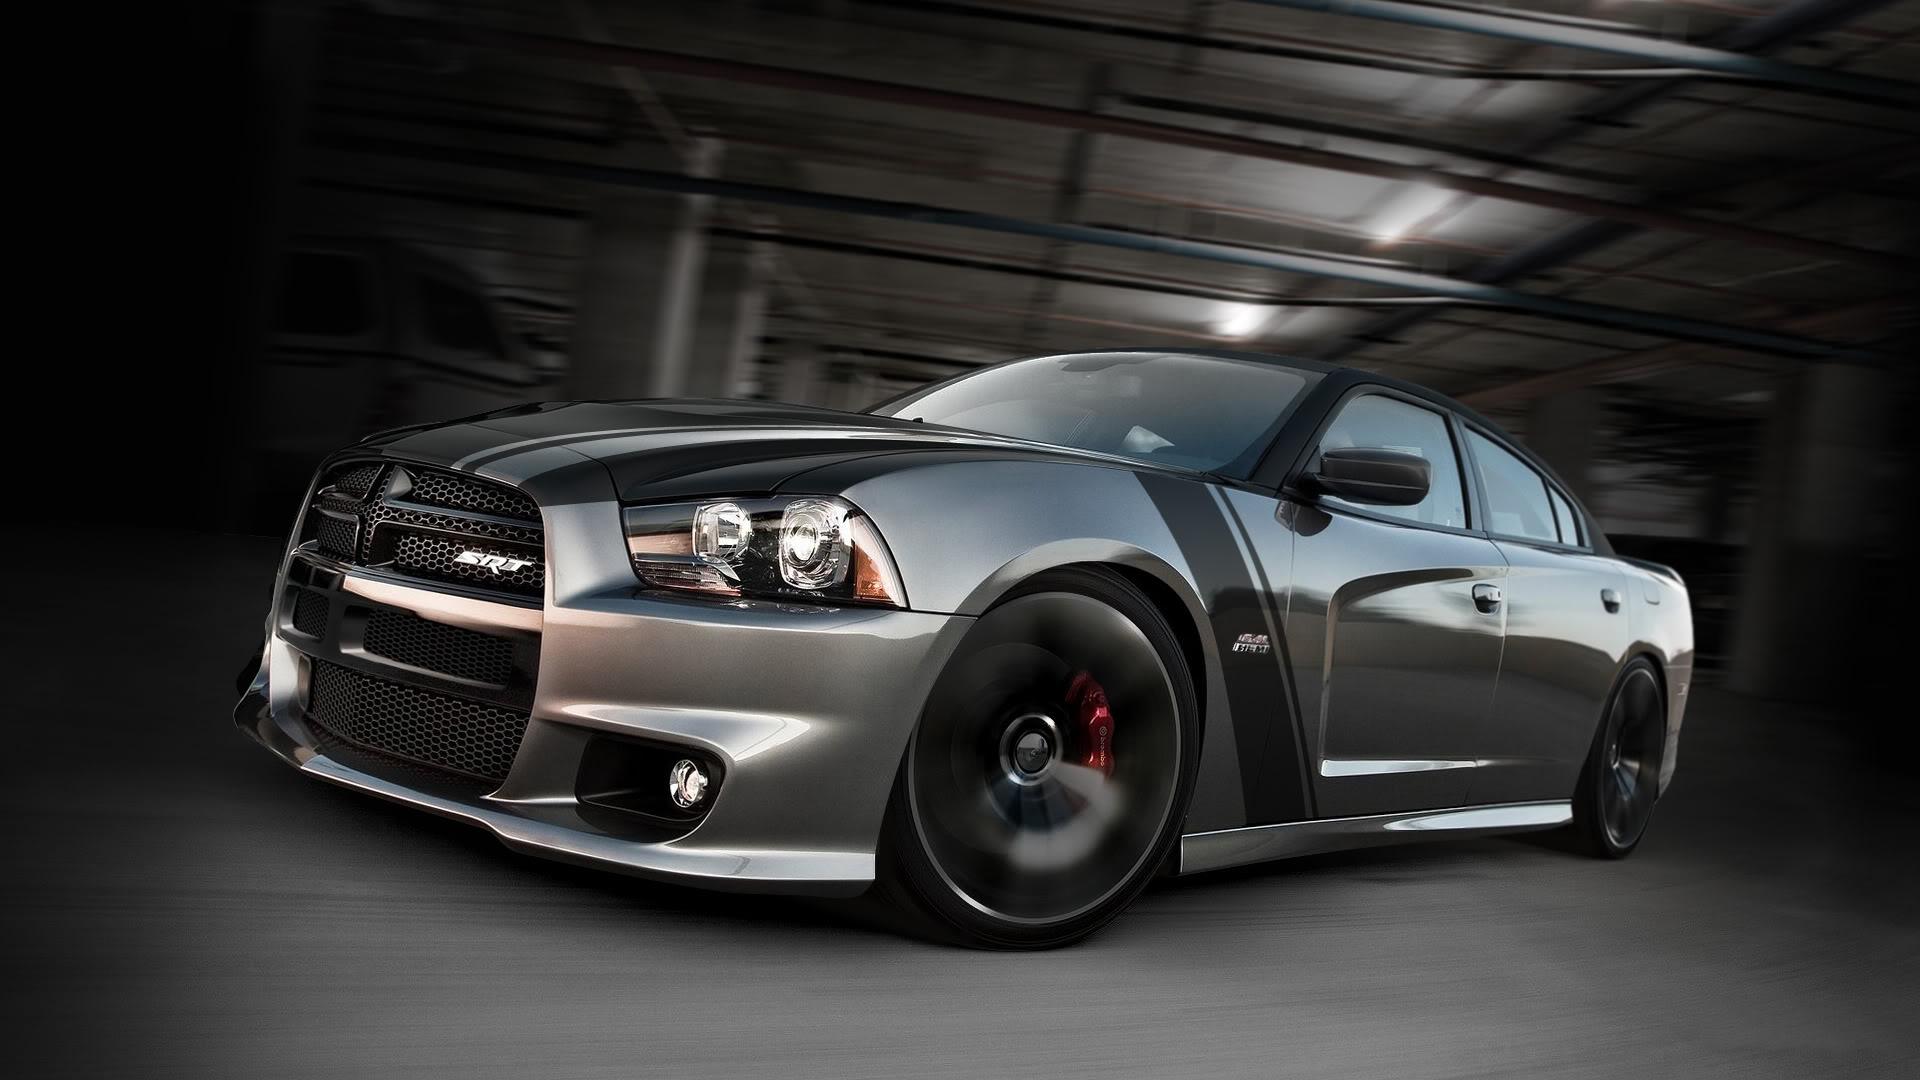 Dodge Charger Srt Wallpapers